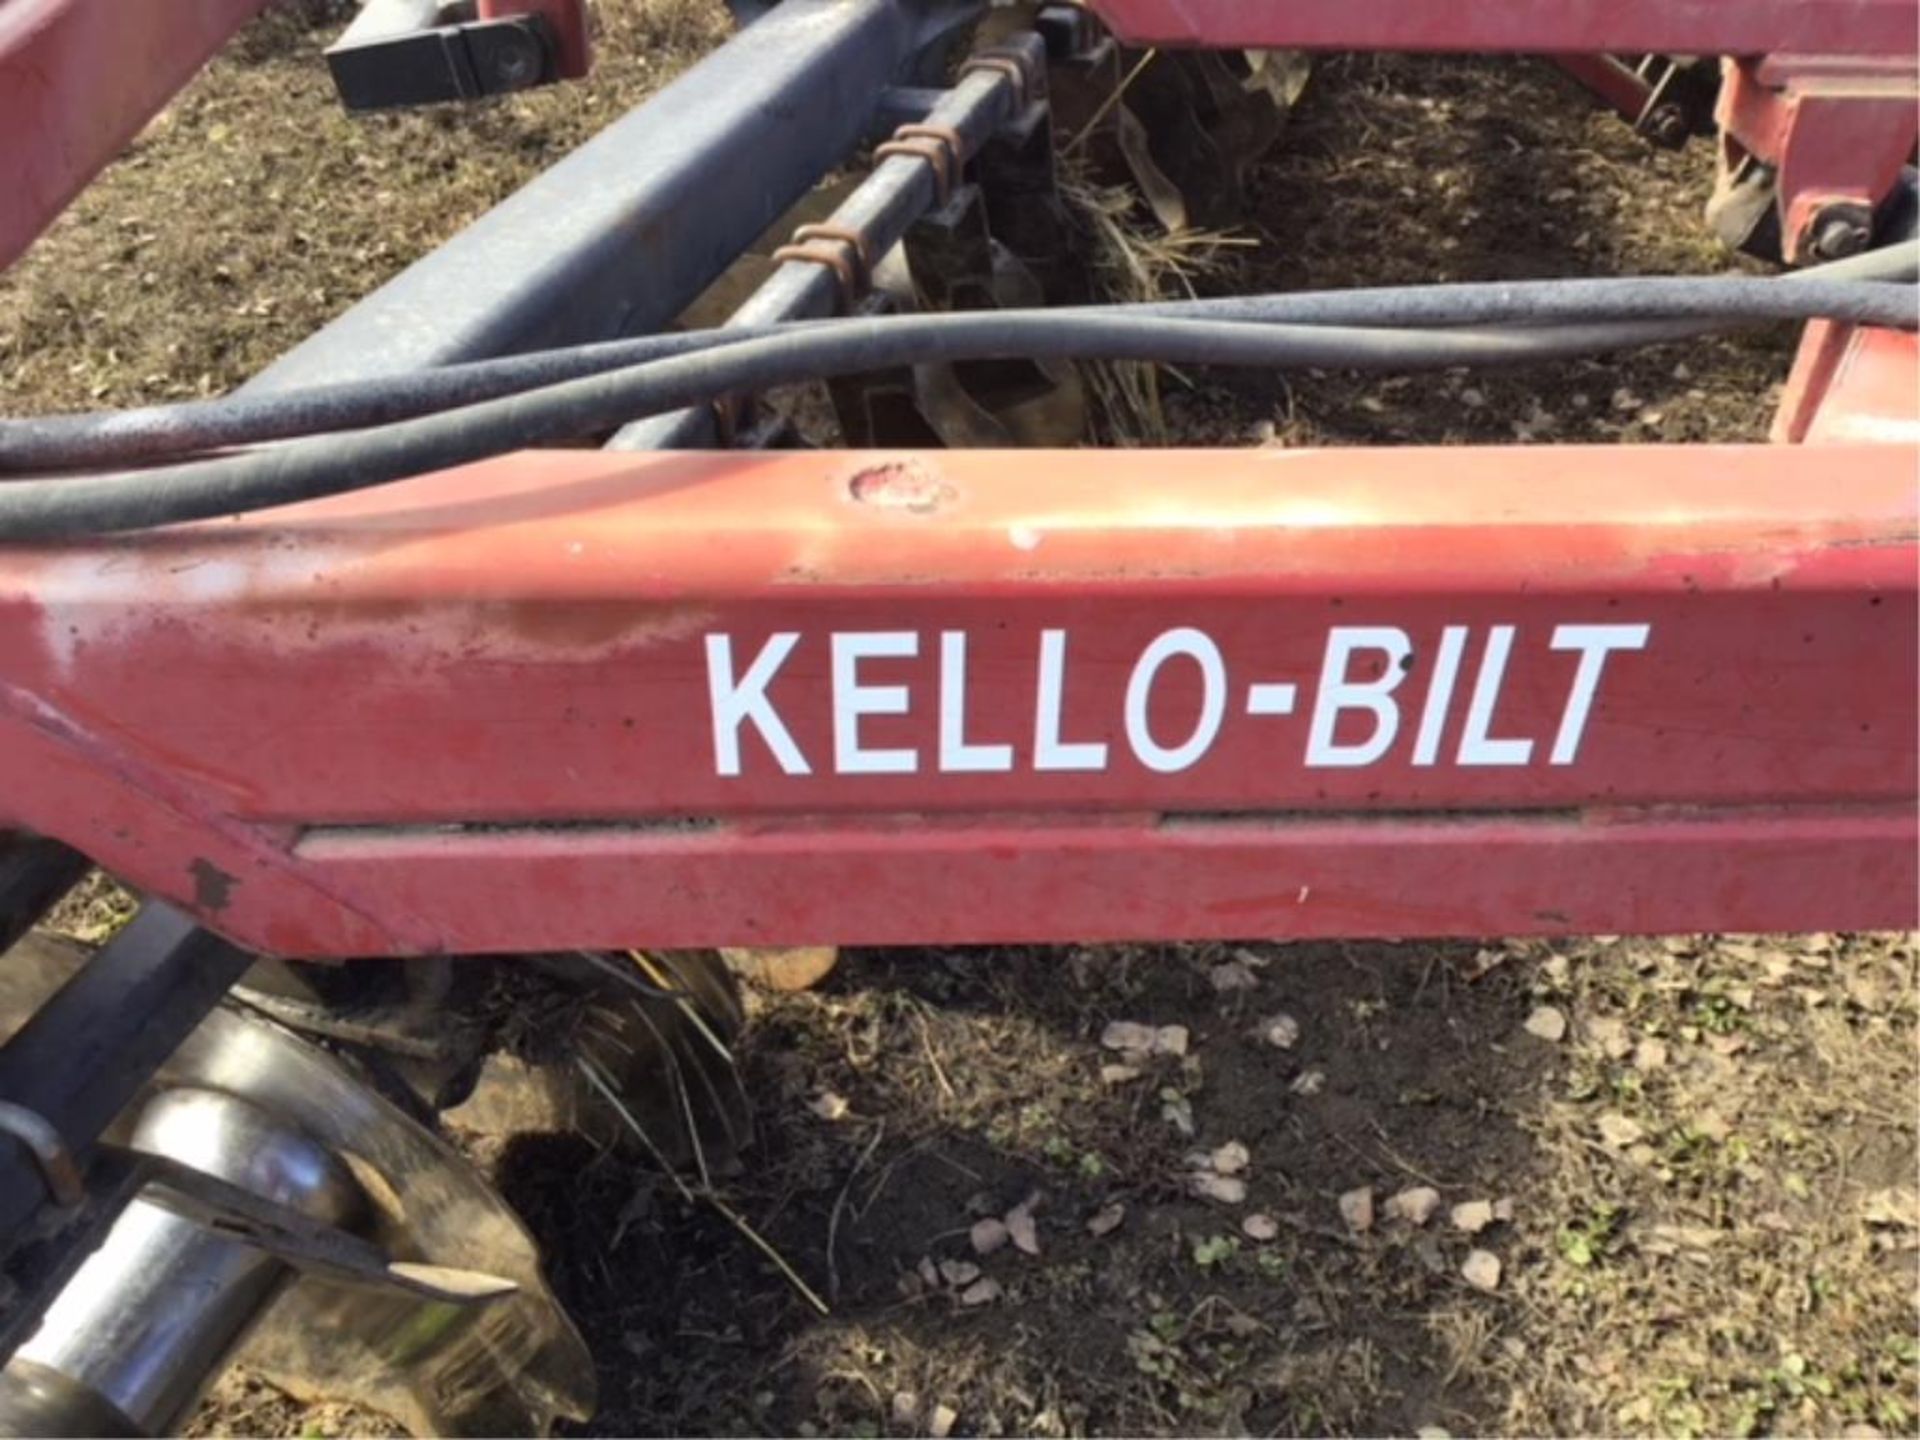 Kello-Built 225 36ft Tandem Disc s/n DF524 23.5in Notched Blades s/n DF524 23.5in Notched Blades - Image 9 of 12